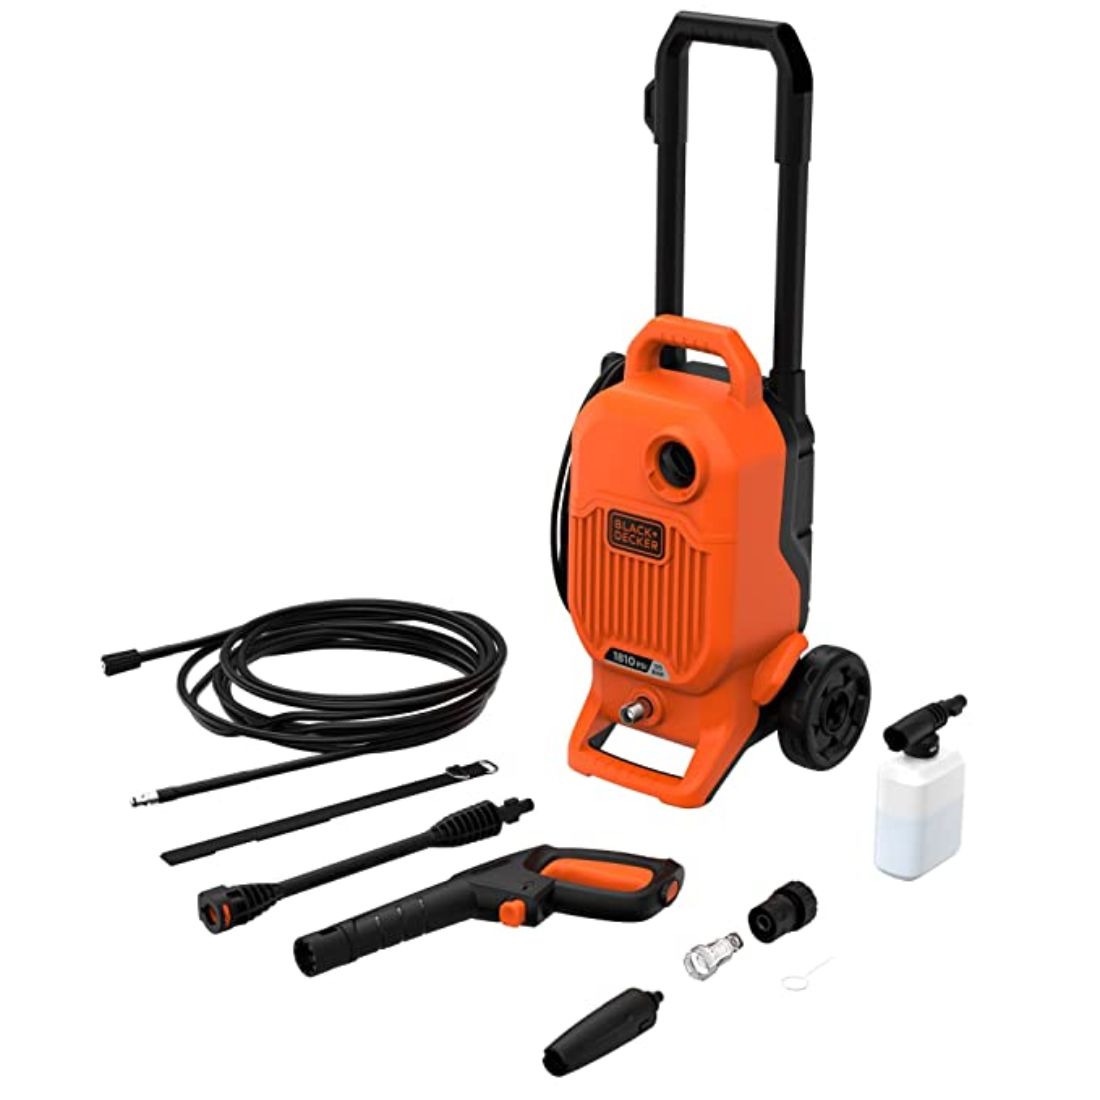 black and decker pressure washer for car washing is available at best price in Chennai